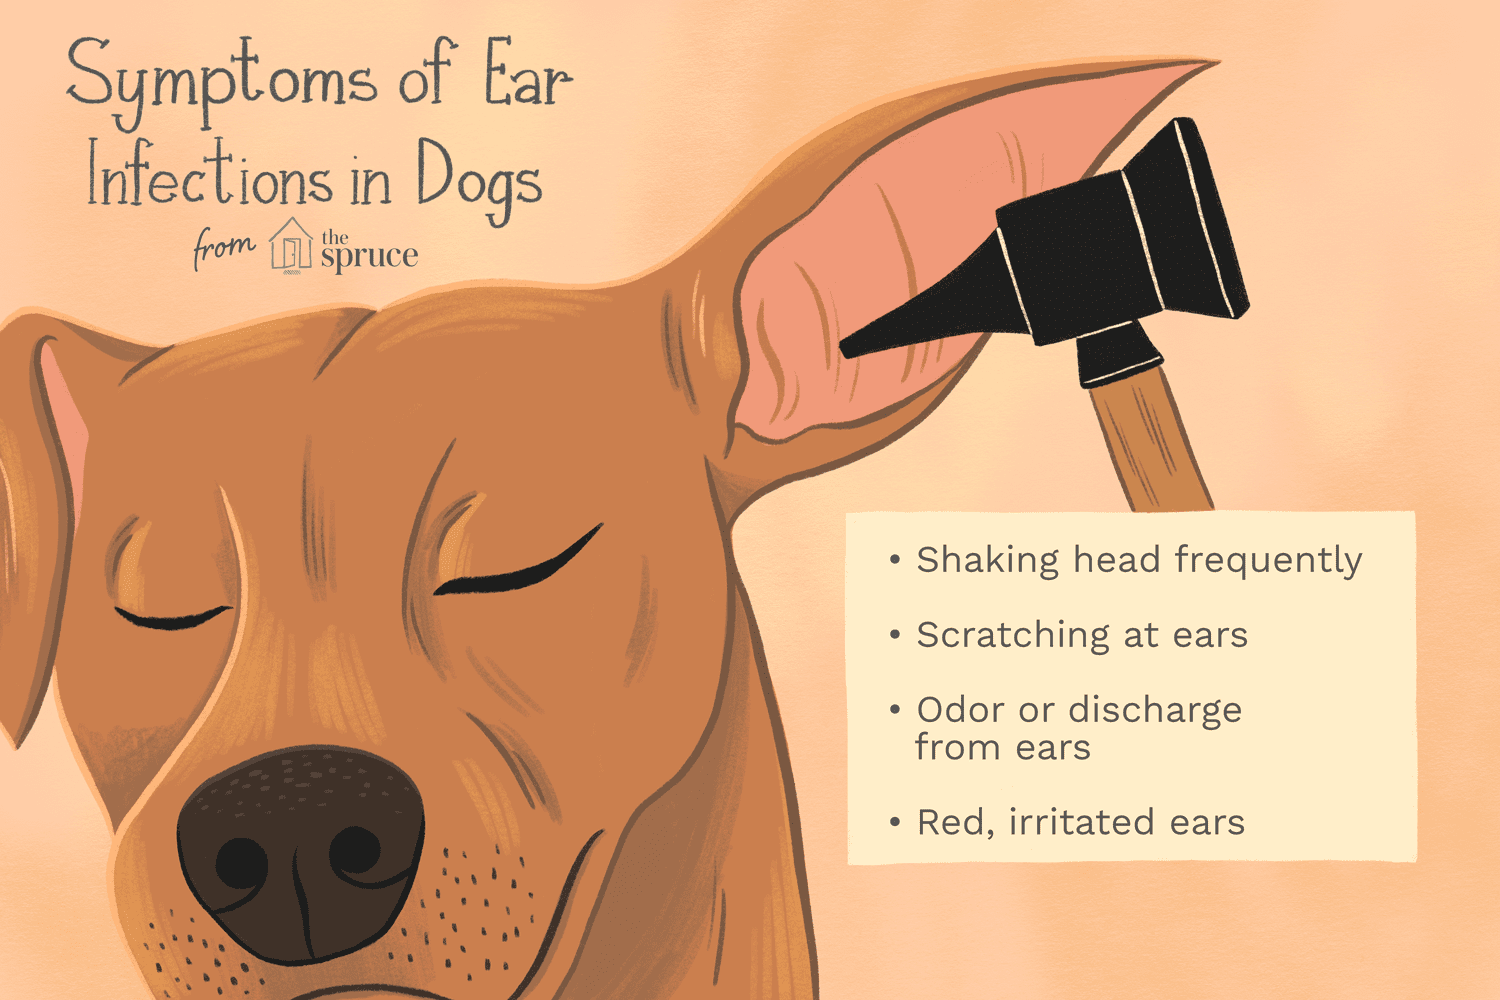 illustration of symptoms of ear infections in dogs